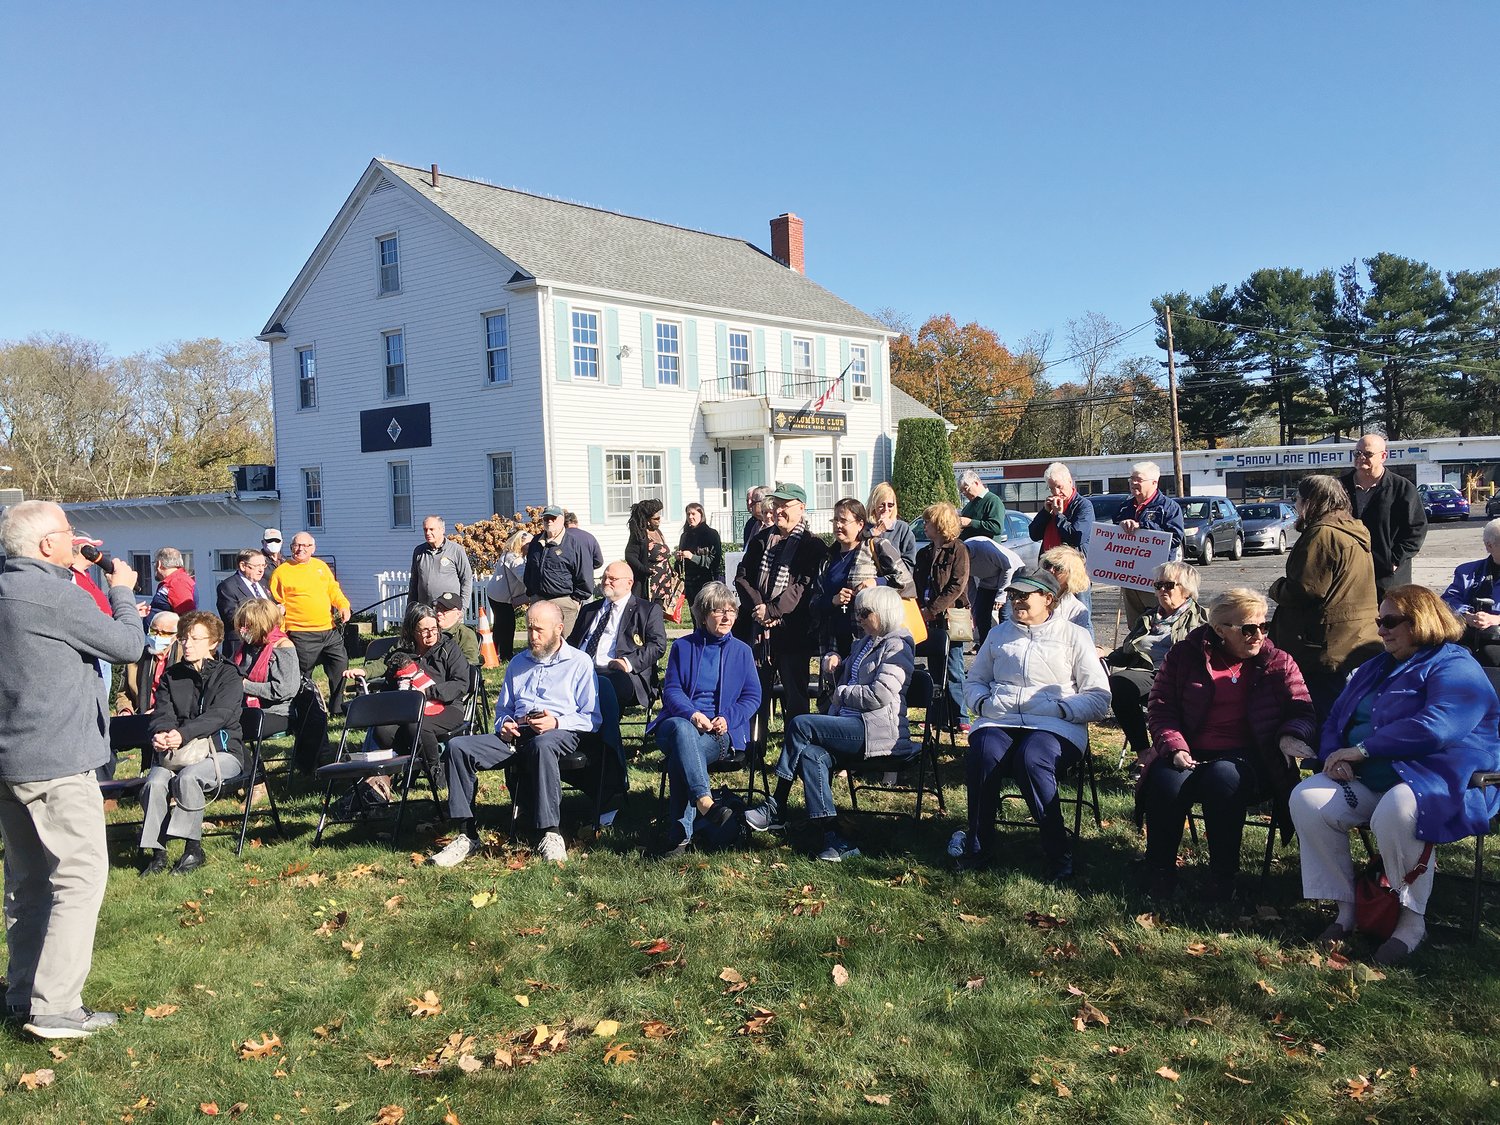 The Rhode Island Legion of Mary and the Rhode Island Knights of Columbus held a Public Square Rosary on the front lawn of the Knights of Columbus hall in Warwick on Saturday, Nov. 13. Members of the Legion, the Knights and anyone who wanted to pray with the group attended the rosary on the beautiful sunny Saturday. The rosary was led by Edward Gallagher from the Legion and David Quinn from the Knights.